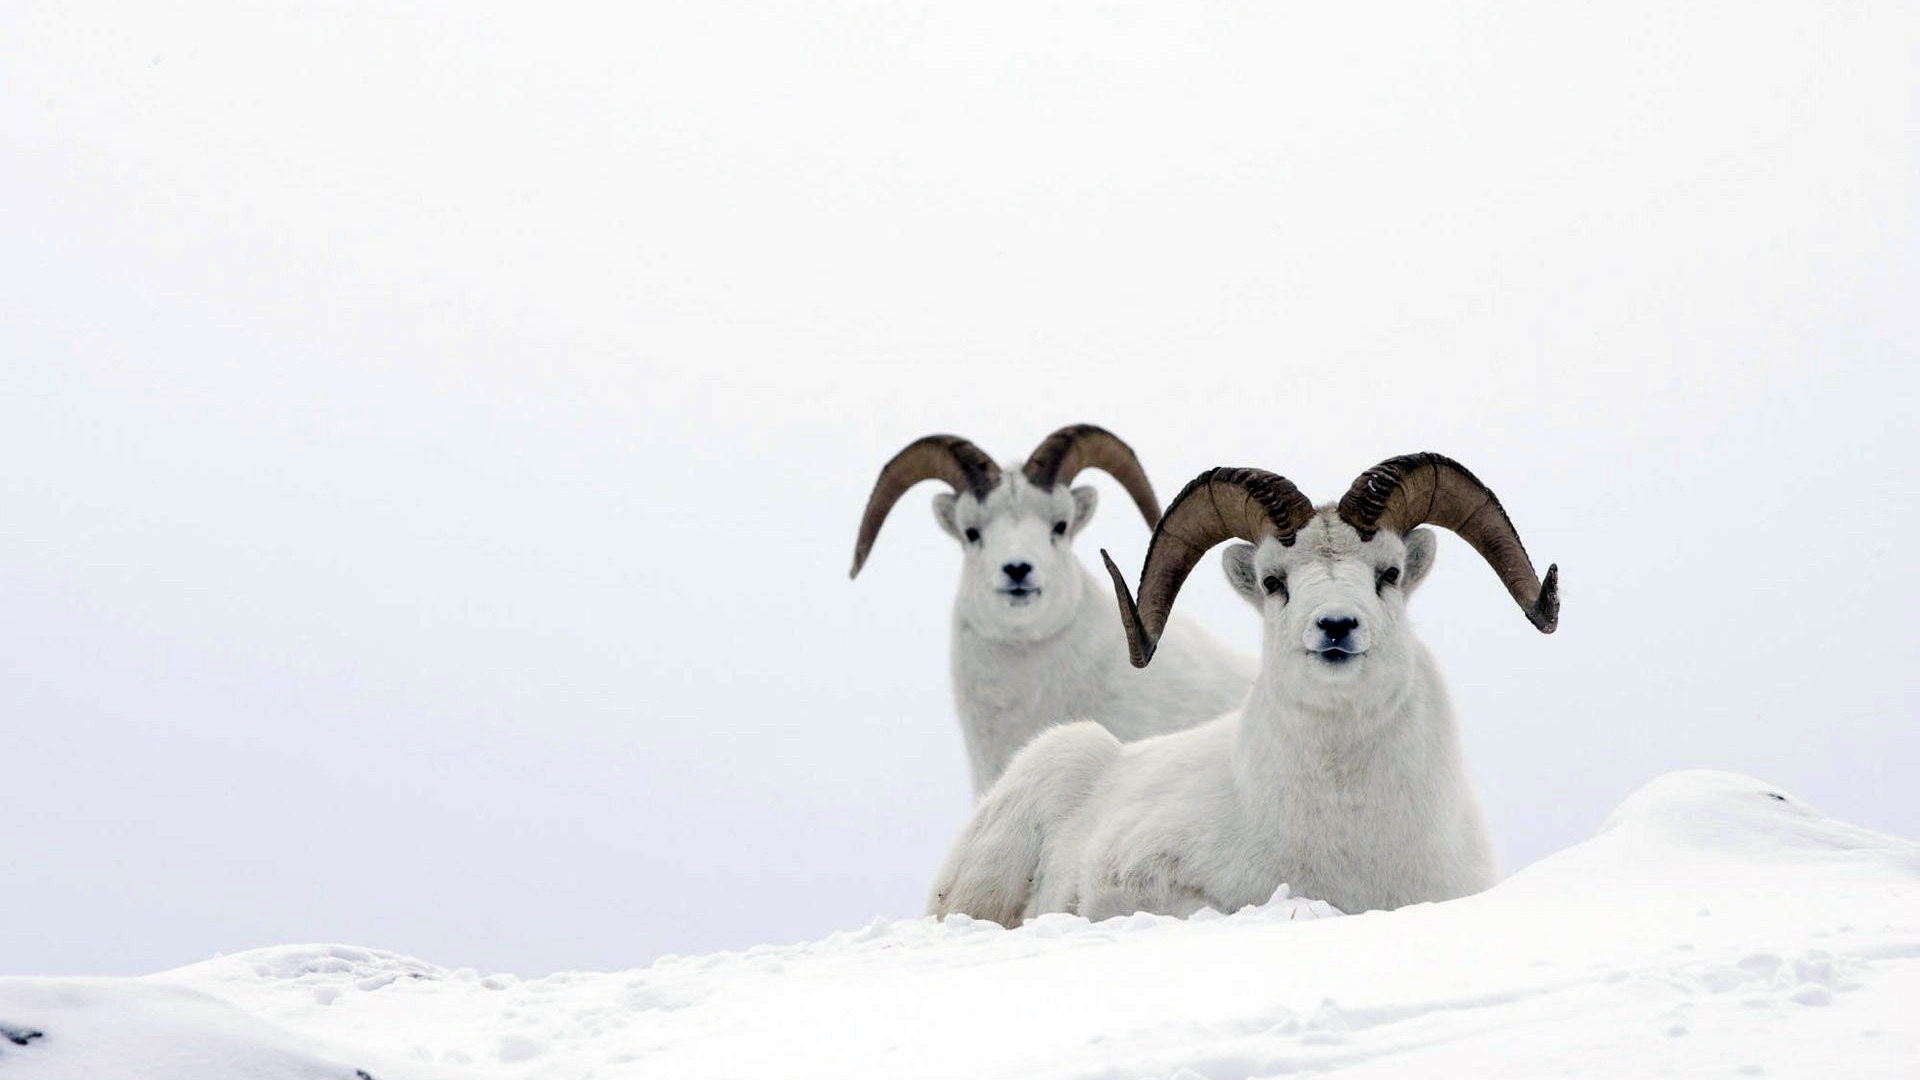 Three White Sheep on Snow Covered Ground During Daytime. Wallpaper in 1920x1080 Resolution